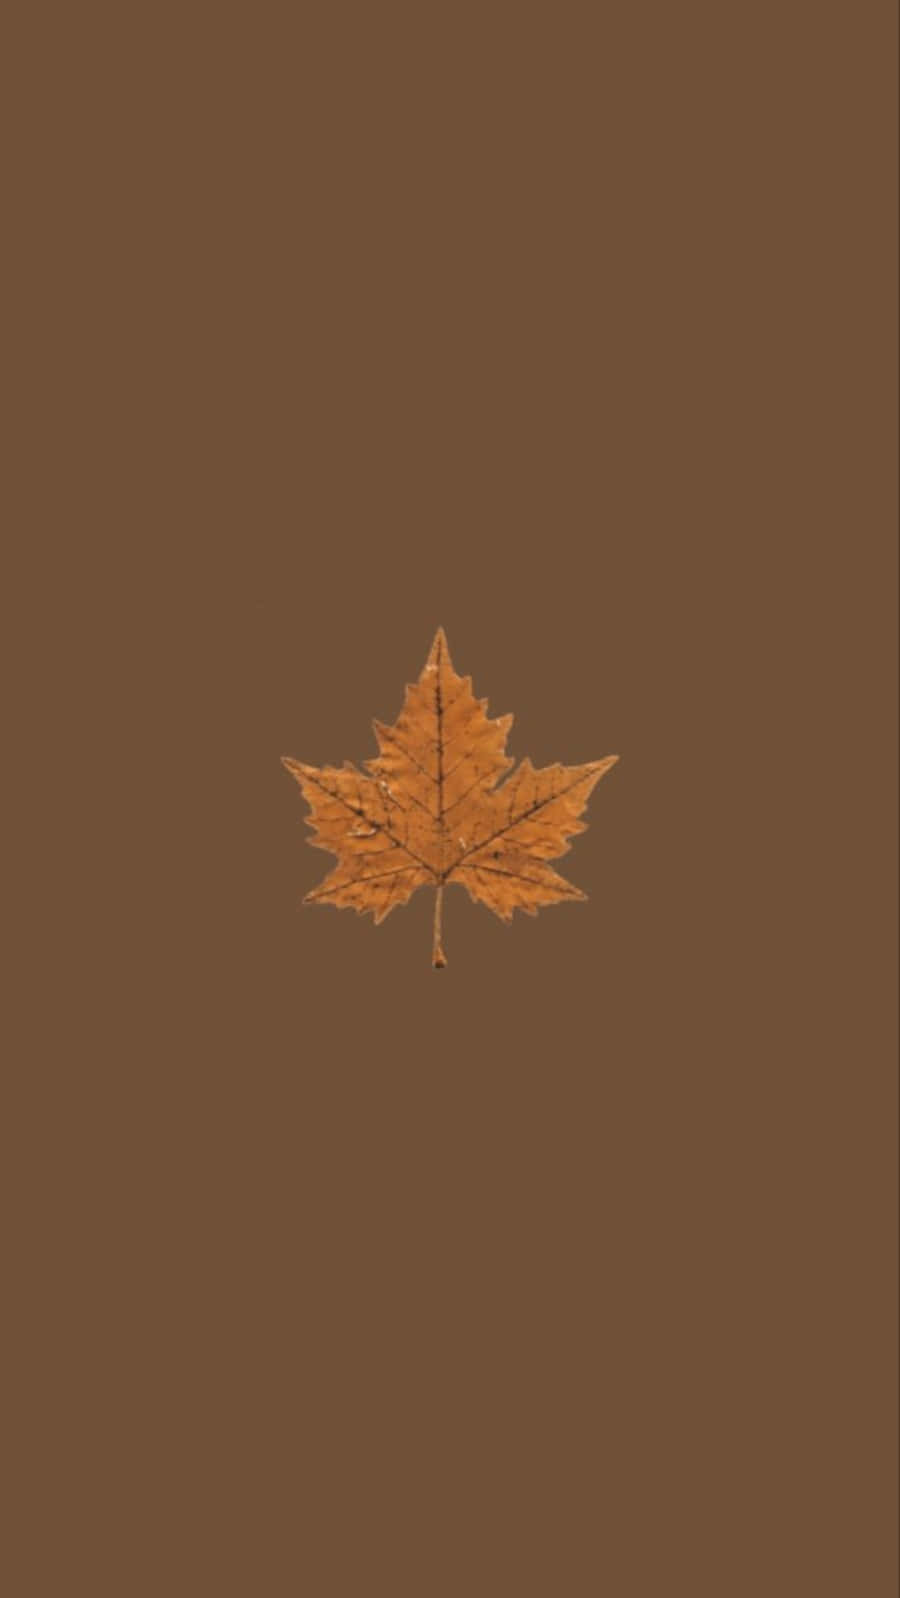 A vibrant maple leaf in all its autumn glory